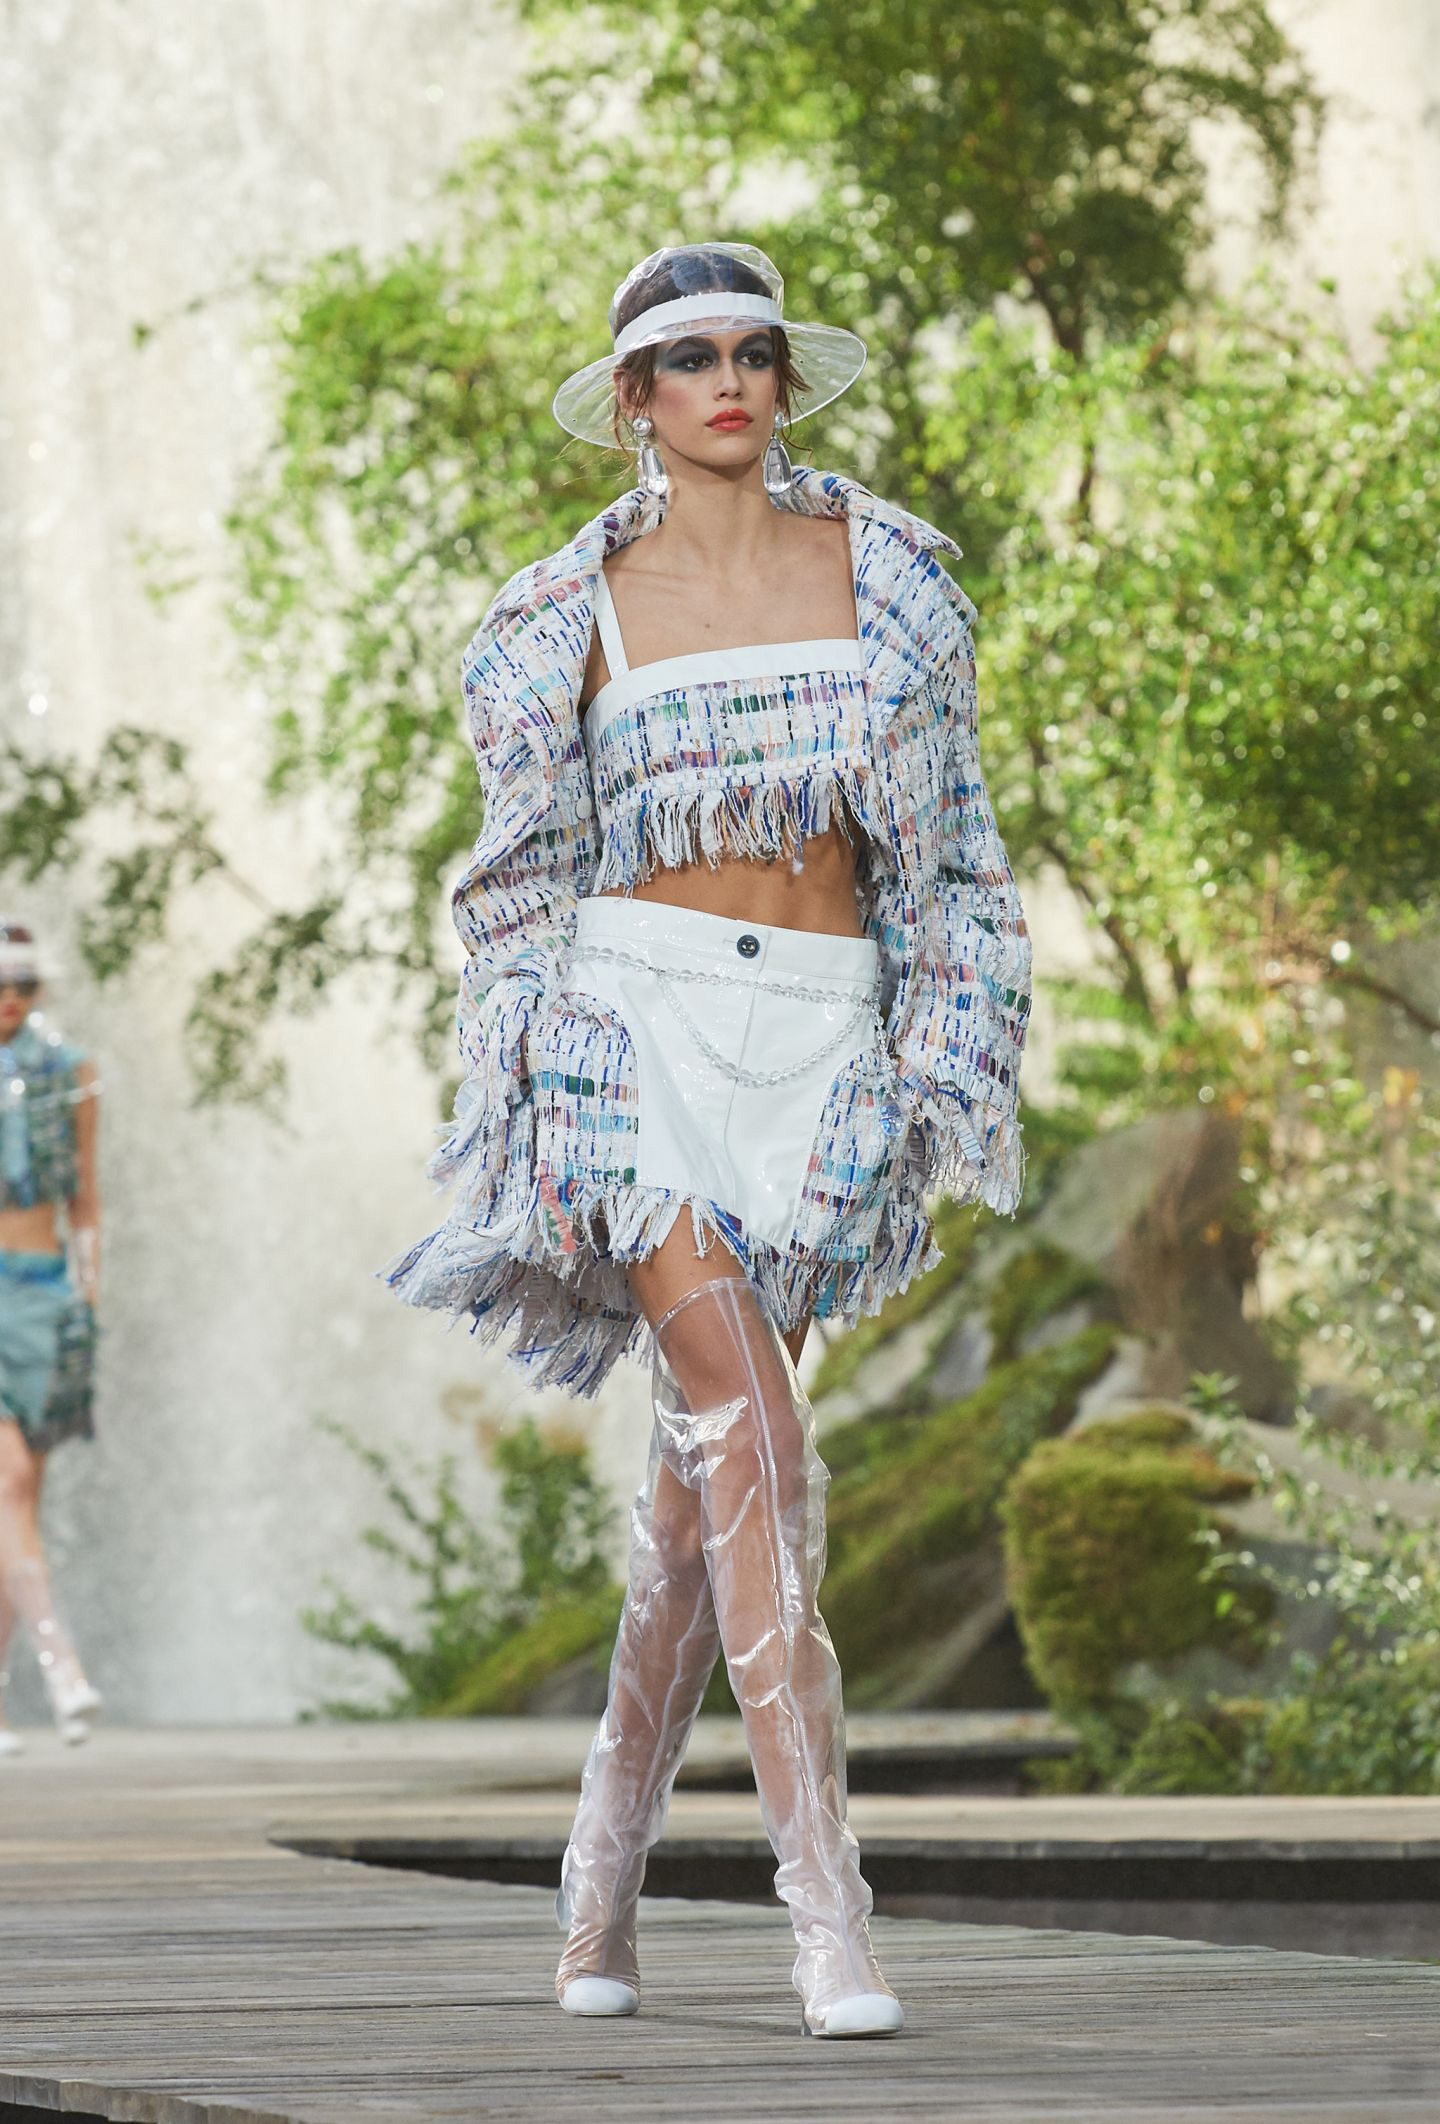 Chanel Spring/Summer 2018 Ready-to-Wear Collection - Fashion Trendsetter